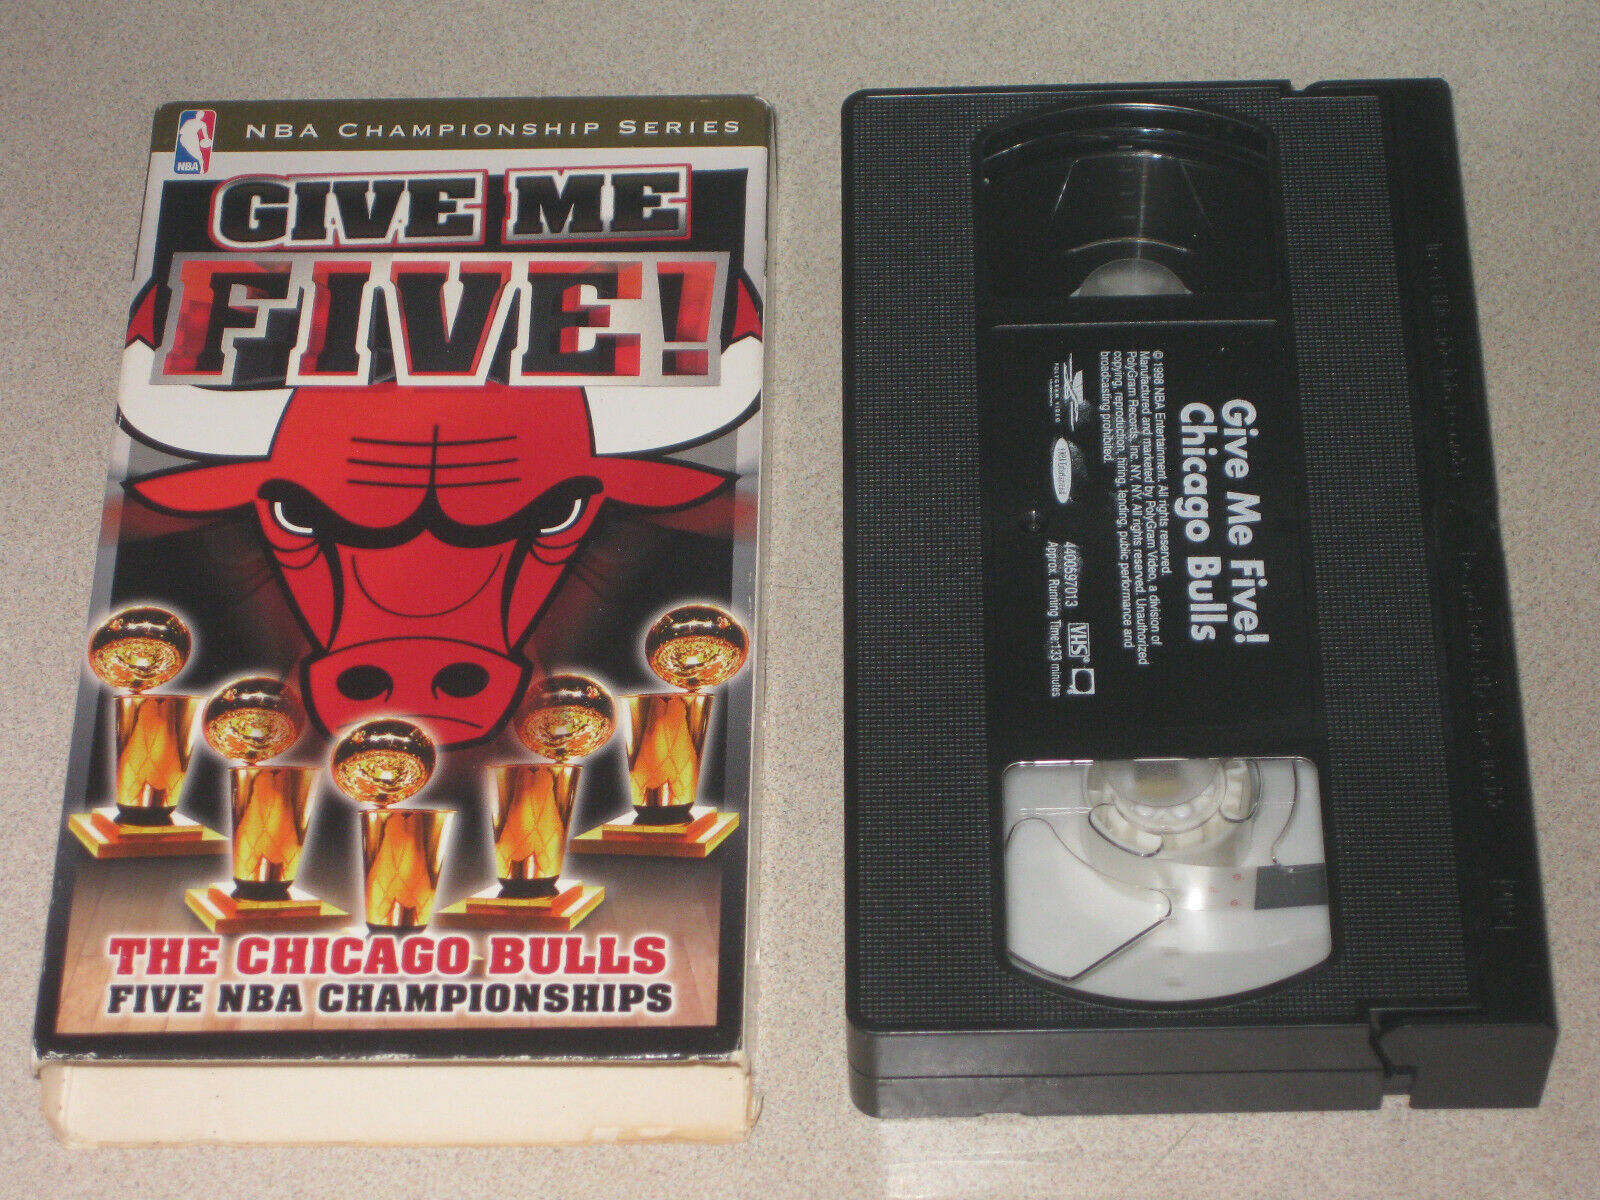 Give Me Five: The Chicago Bulls Five NBA Championships (VHS, 1998)